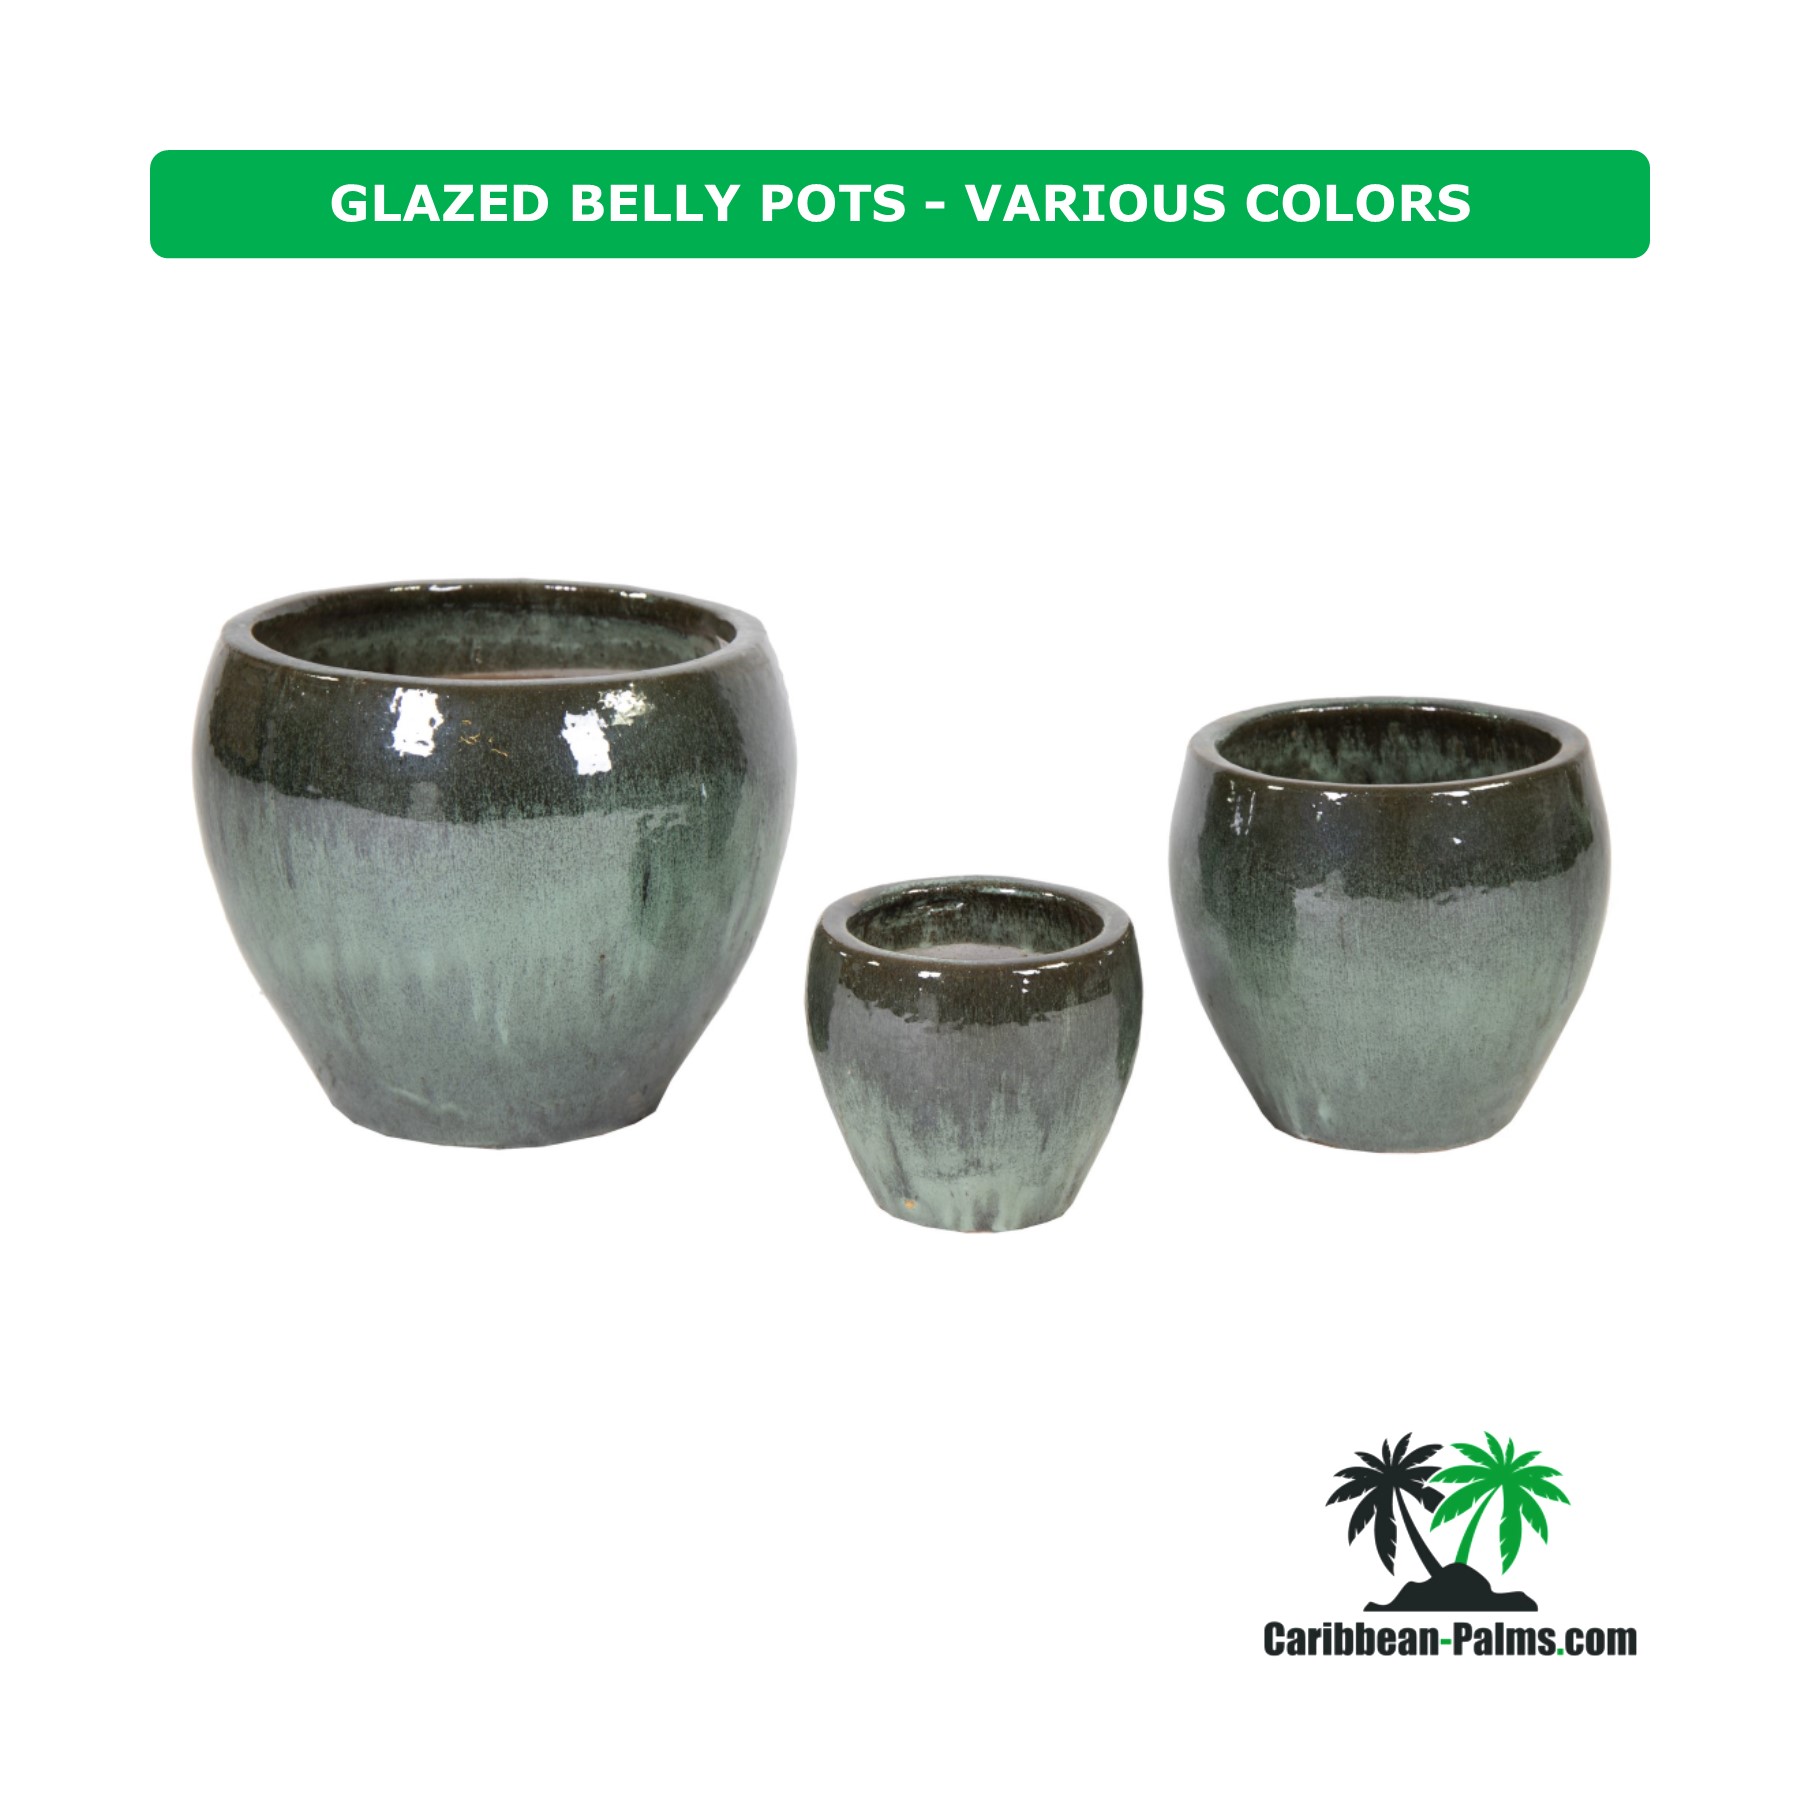 GLAZED BELLY POTS VARIOUS COLORS